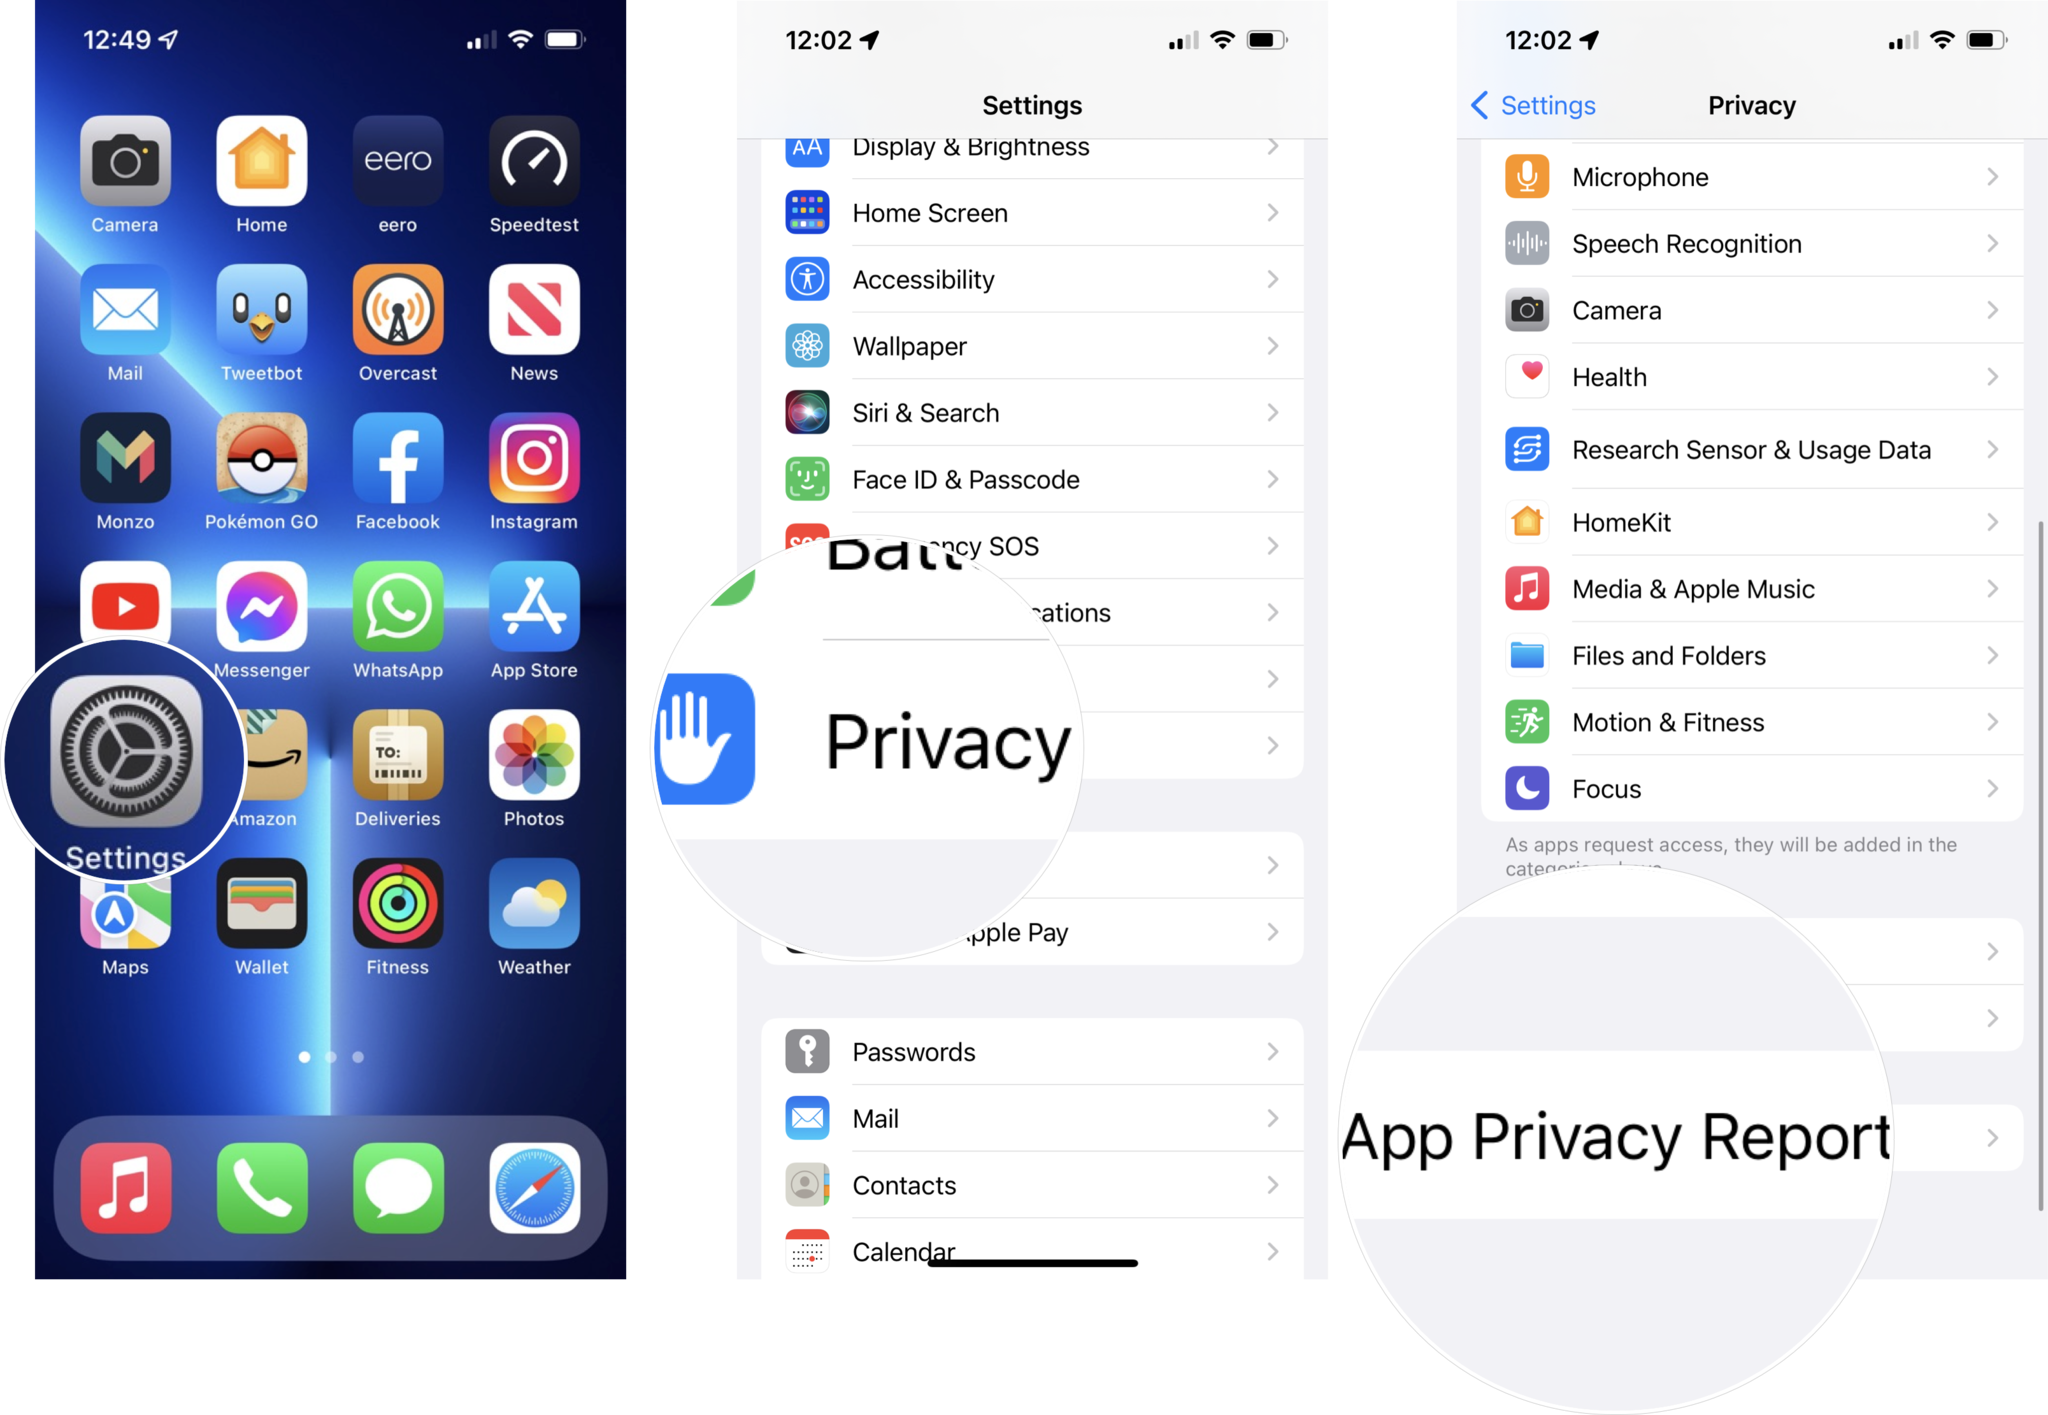 How to turn off App Privacy Report: Open Settings, tap Privacy, tap App Privacy Report